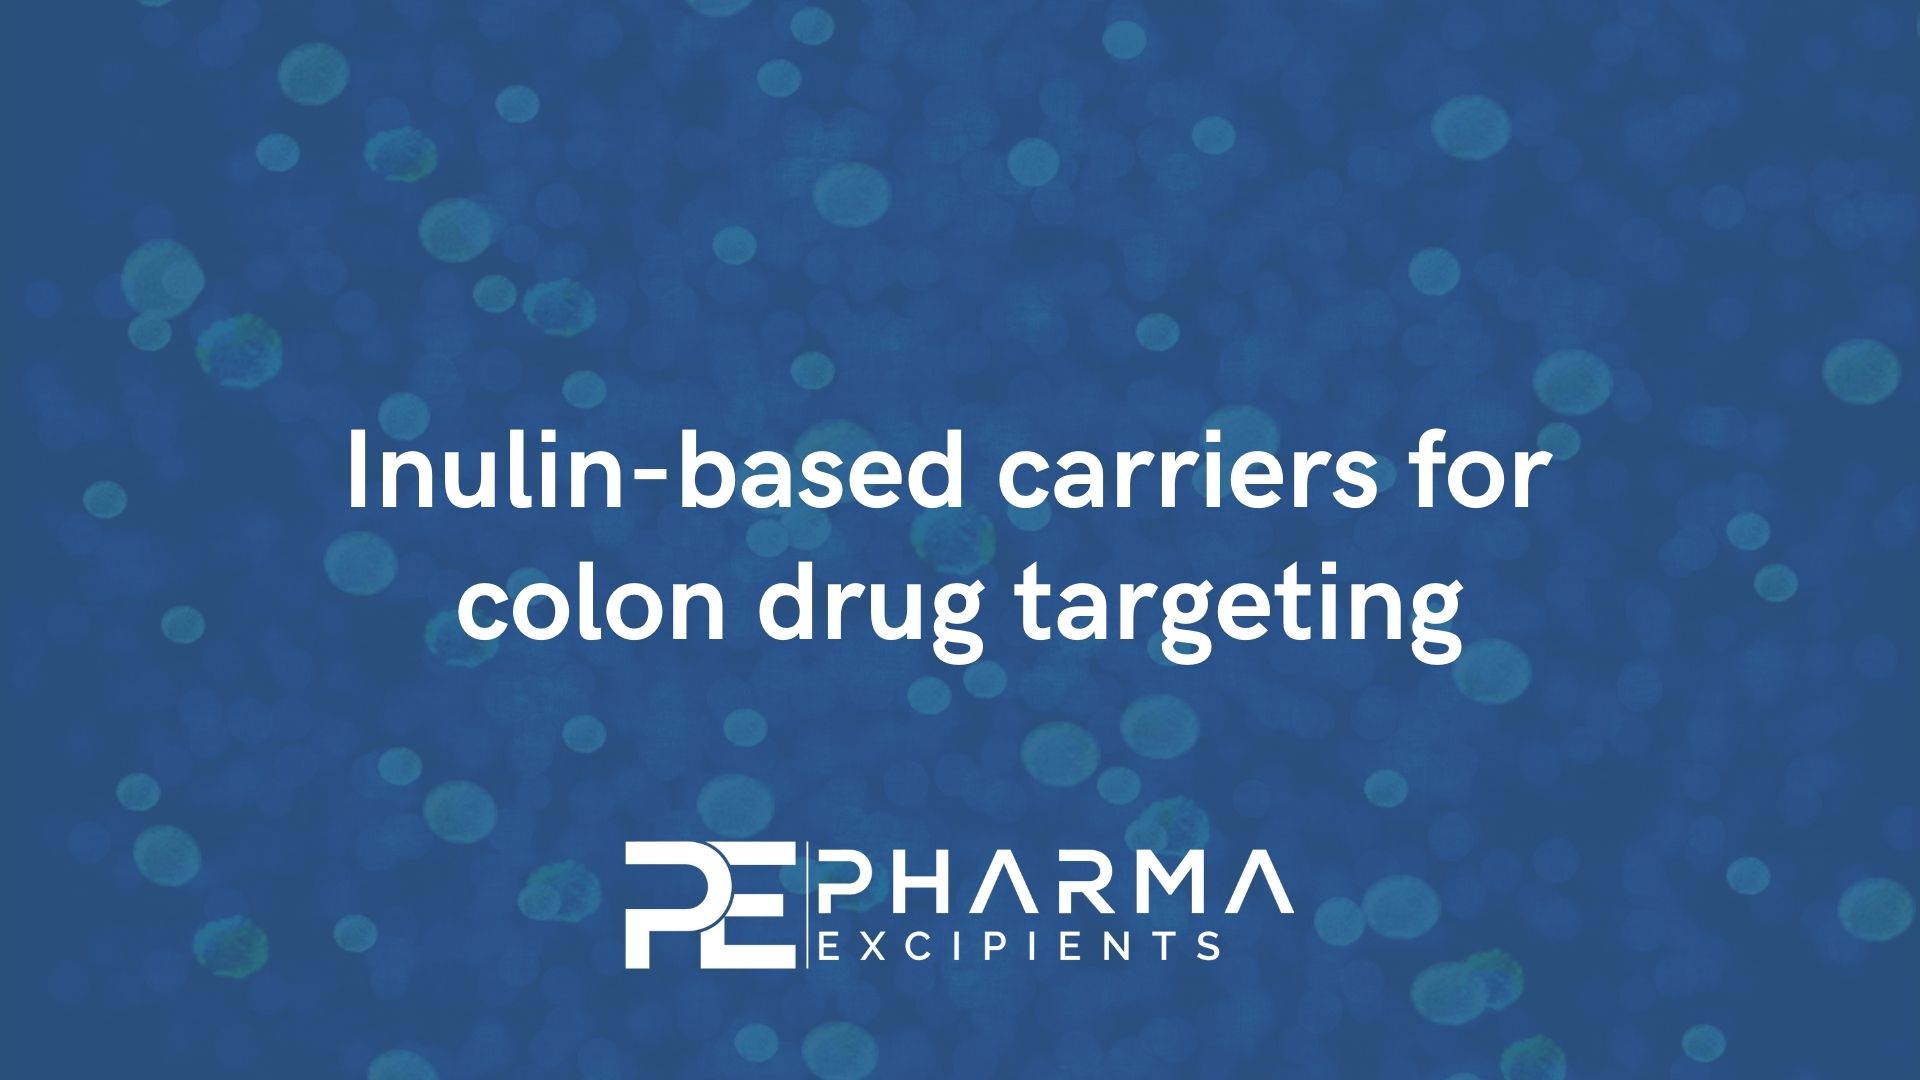 Inulin-based carriers for colon drug targeting with blue background